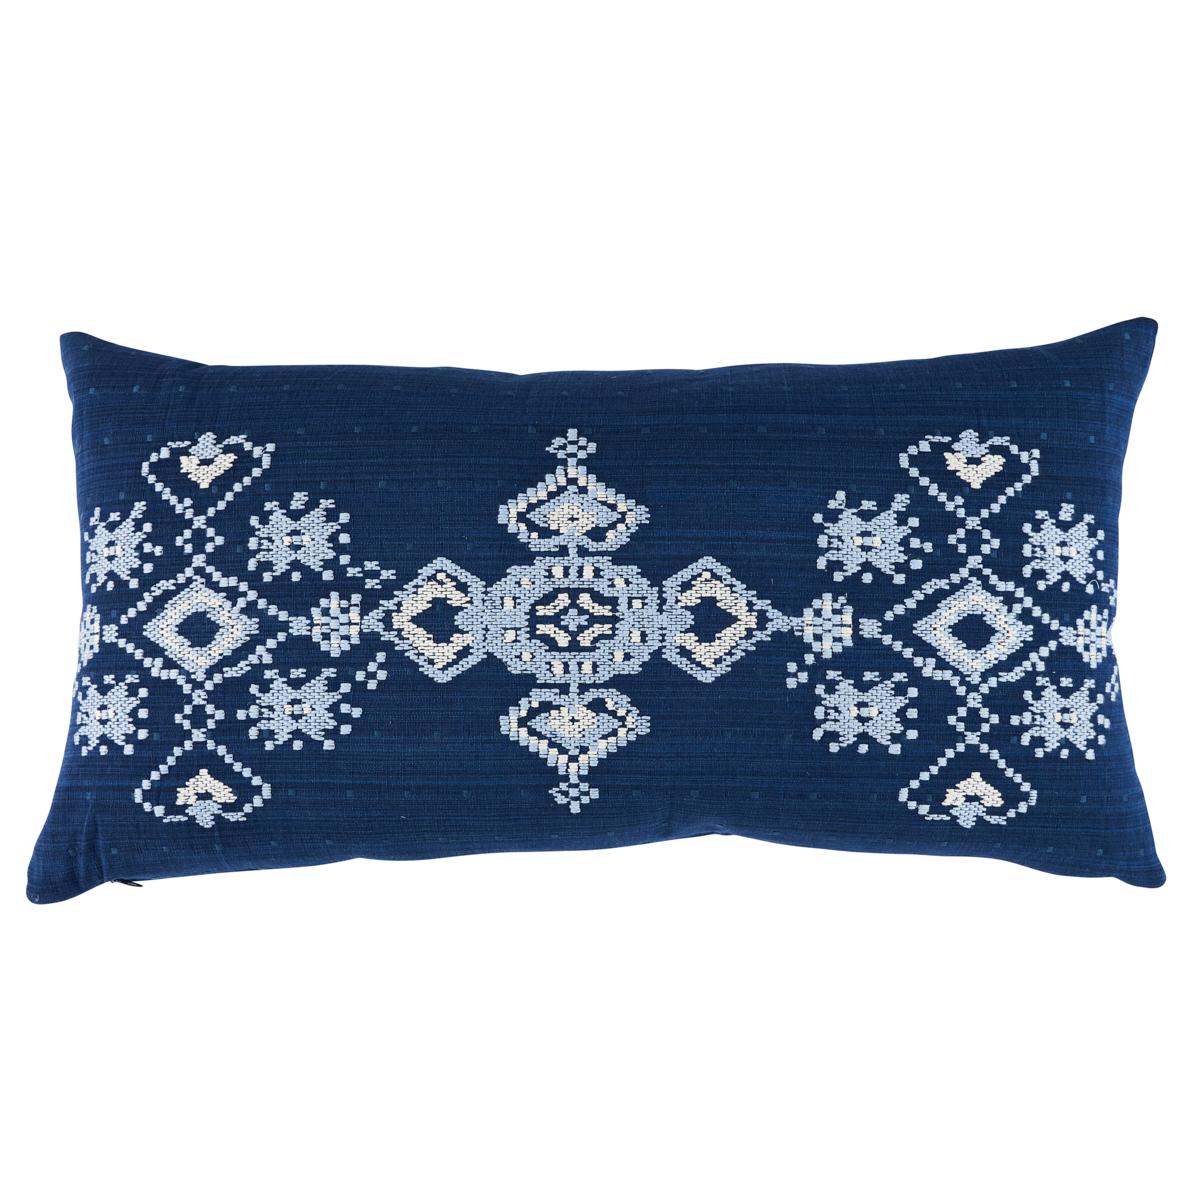 This pillow features Nadira Embroidery with a knife edge finish. Inspired by Moroccan needlework, Nadira Embroidery in indigo features a unique cross-stitch design on a cotton-linen ground. Hand-dyed yarns create a lovely strié effect, giving this